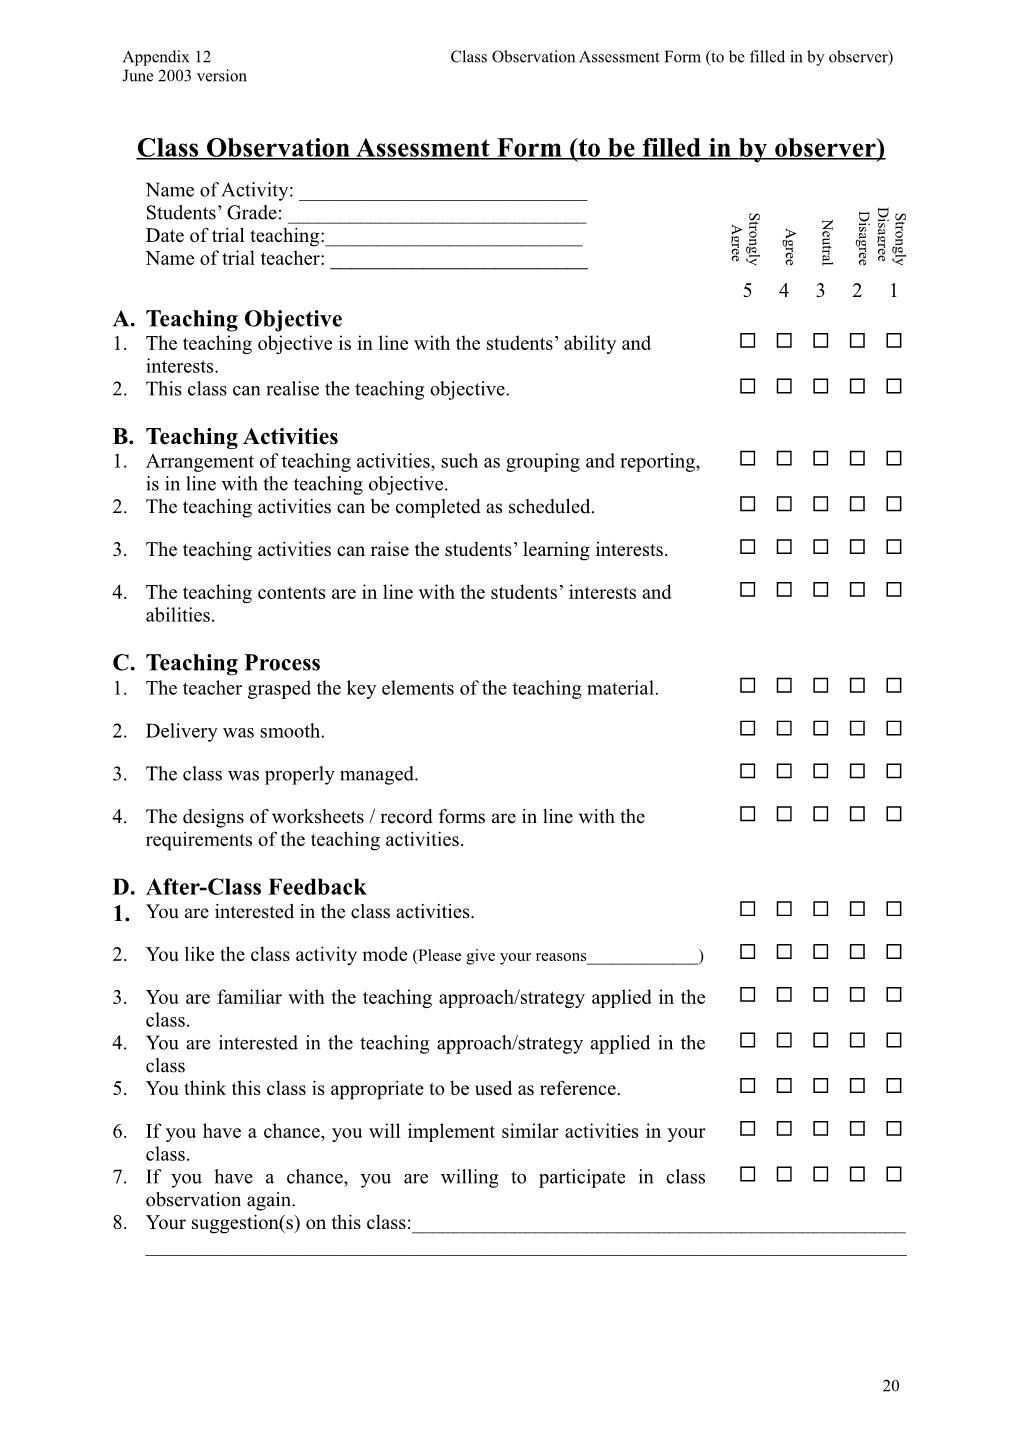 Class Observation Assessment Form (To Be Filled in by Observer)